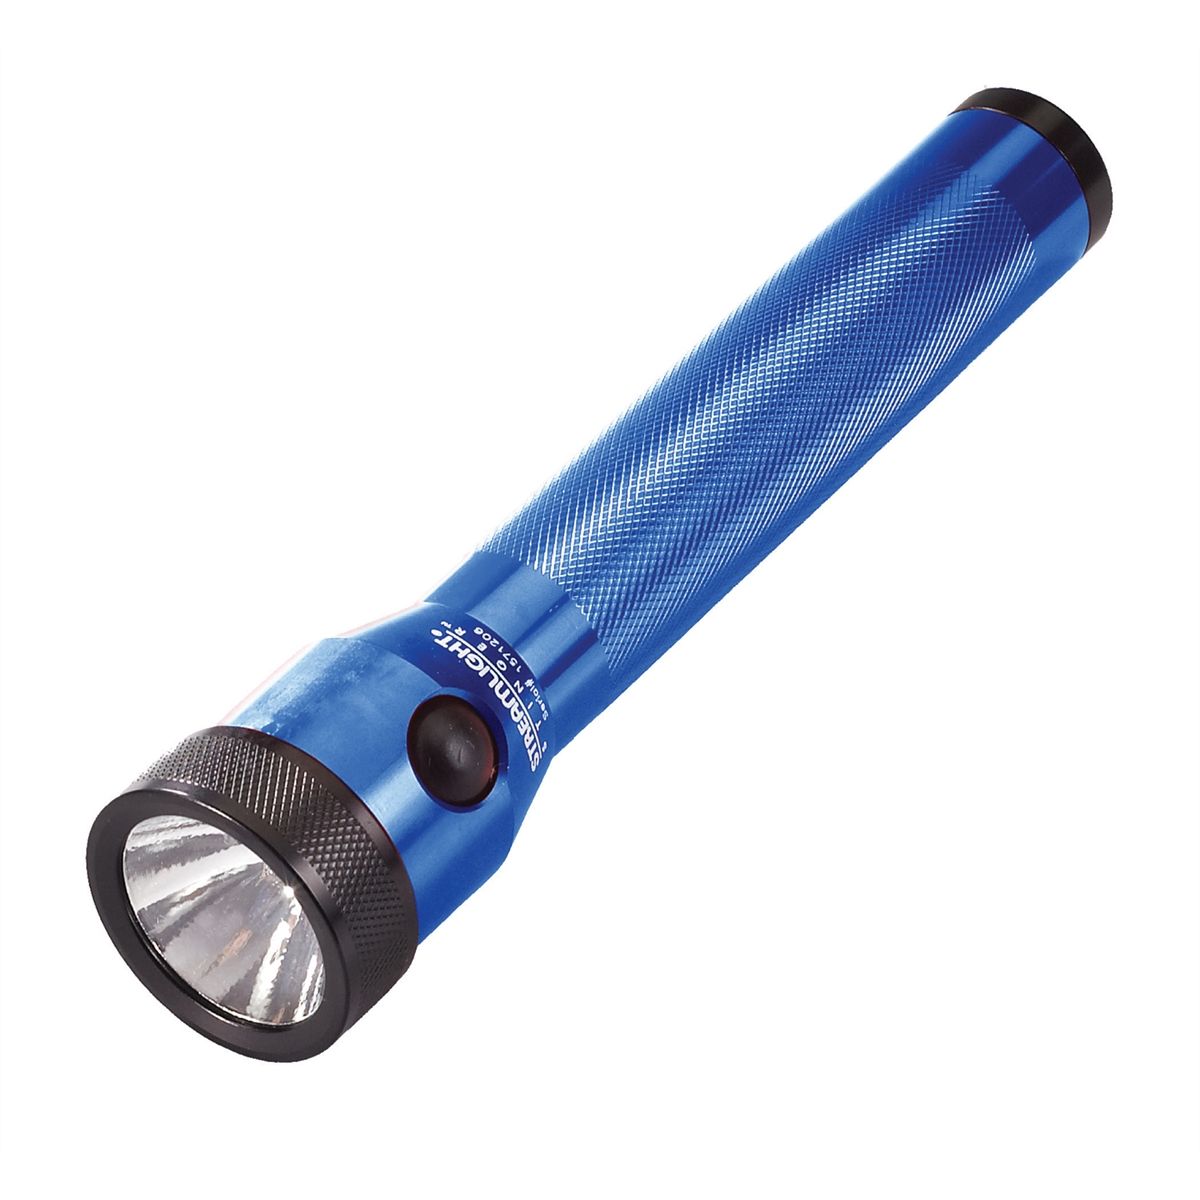 Stinger Fast Charge Rechargeable Flashlight - Blue